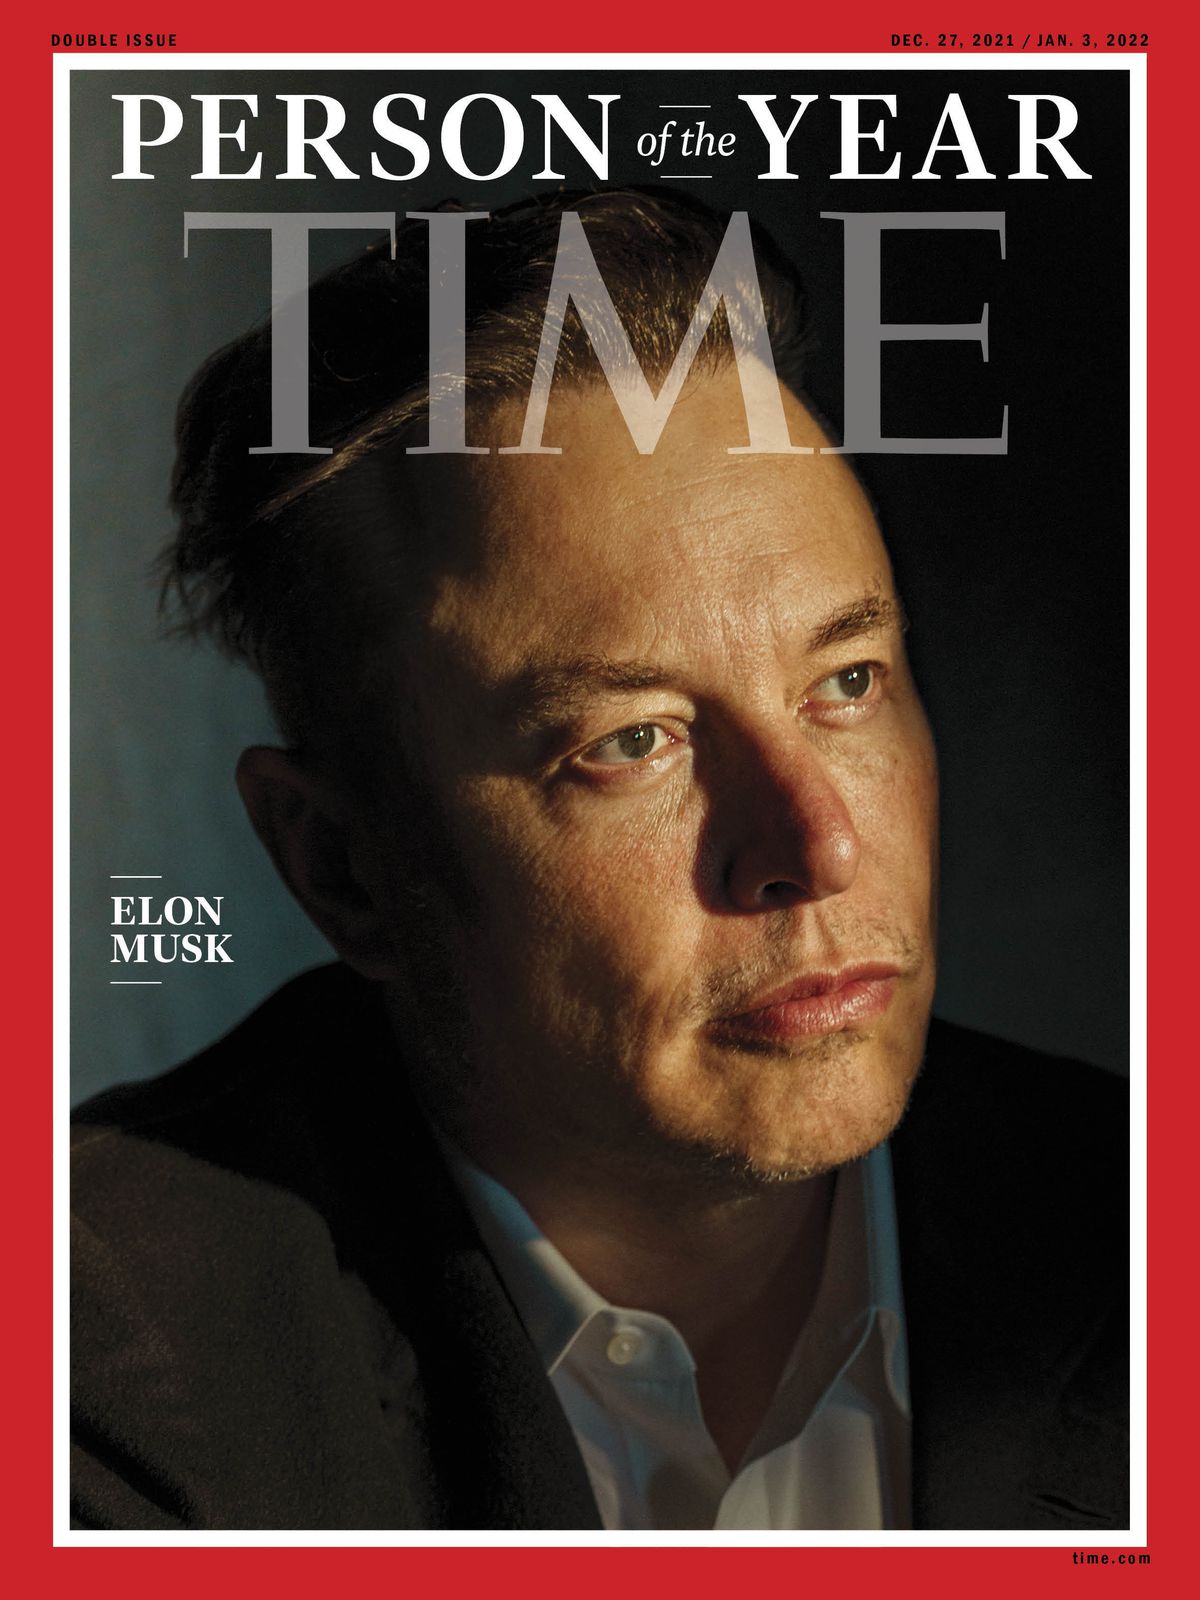 This photo provided by Time magazine shows Elon Musk on the cover of the magazine’s Dec. 27 - Jan 3 double issue announcing Musk as their 2021 “Person of the Year.”